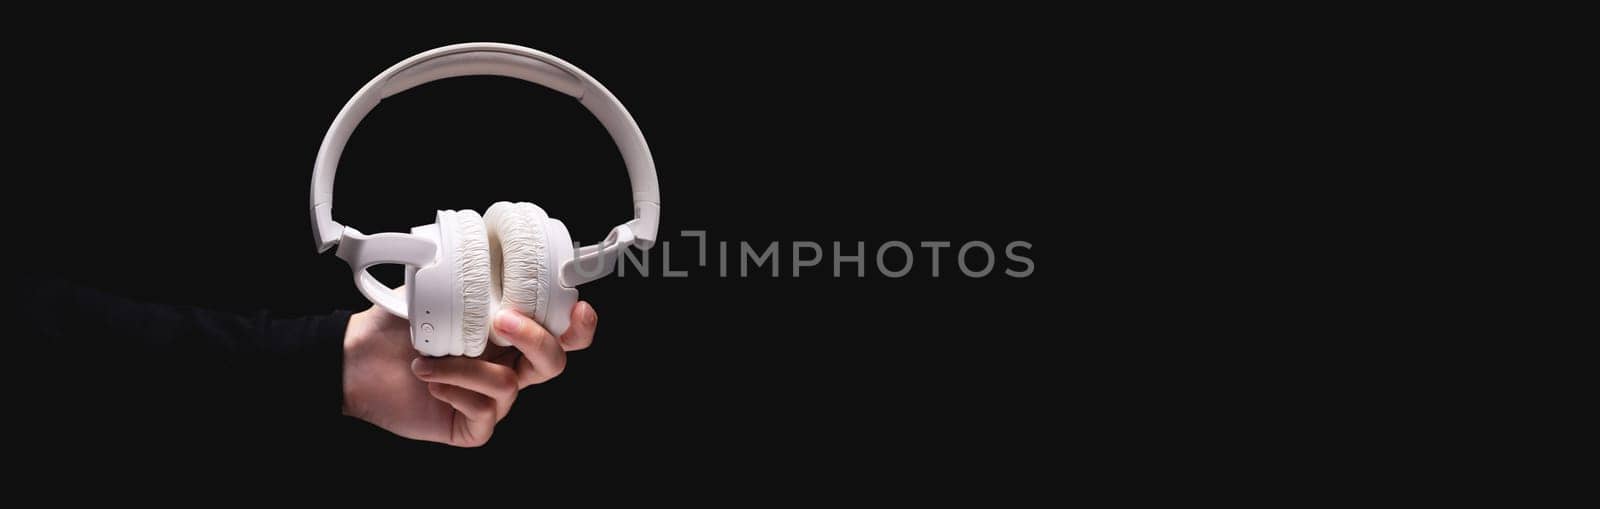 white headphones in a woman's outstretched hand on a dark background, banner for advertising.